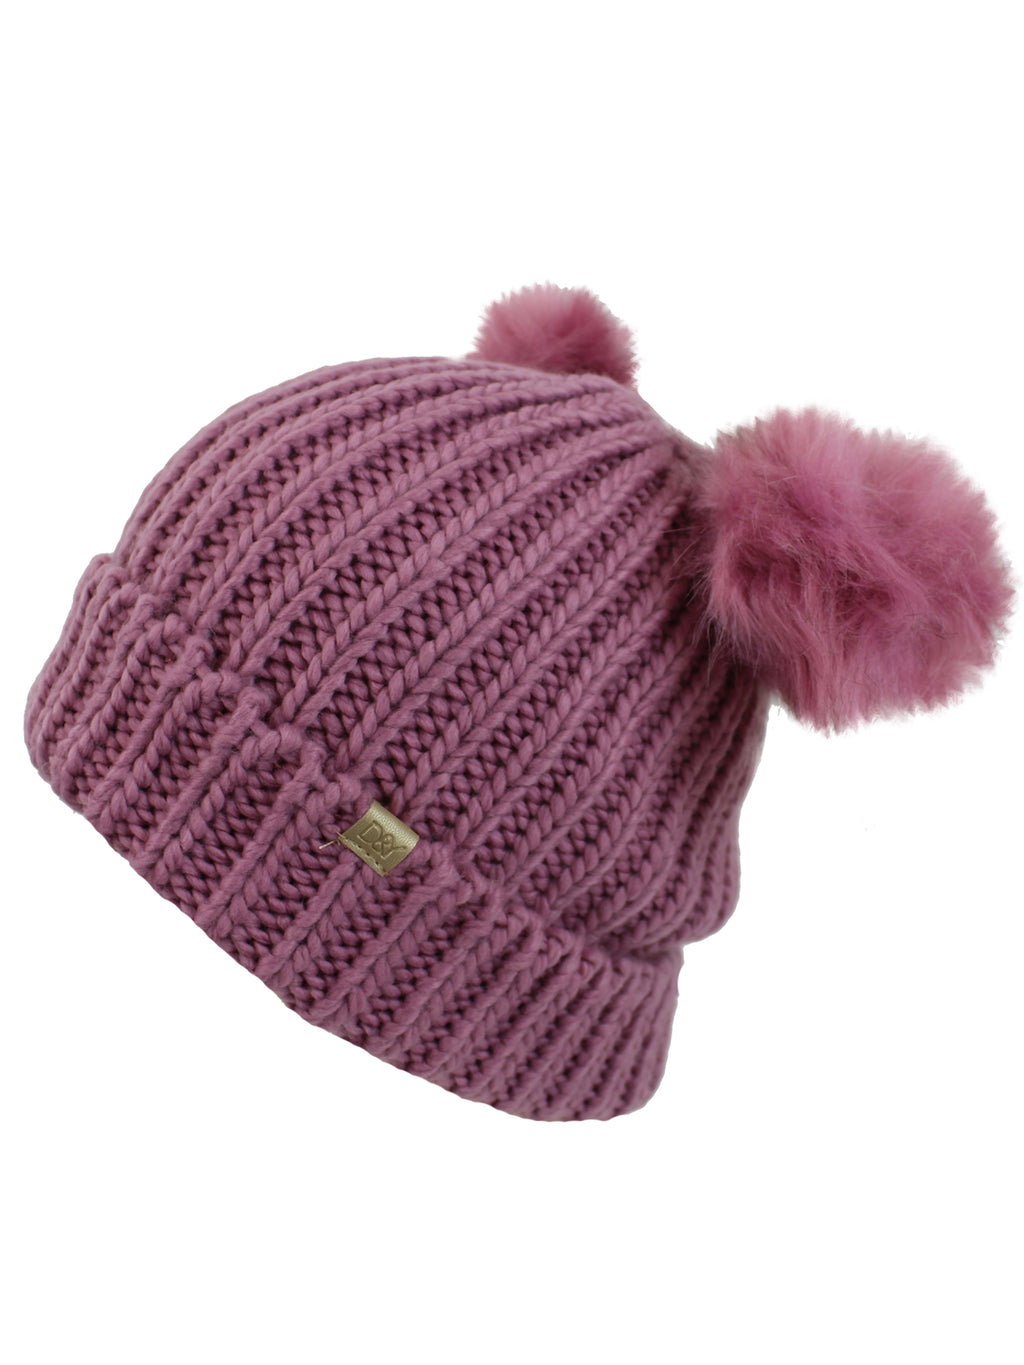 Dusty Pink Knit Beanie Hat With Pigtail Pom Poms